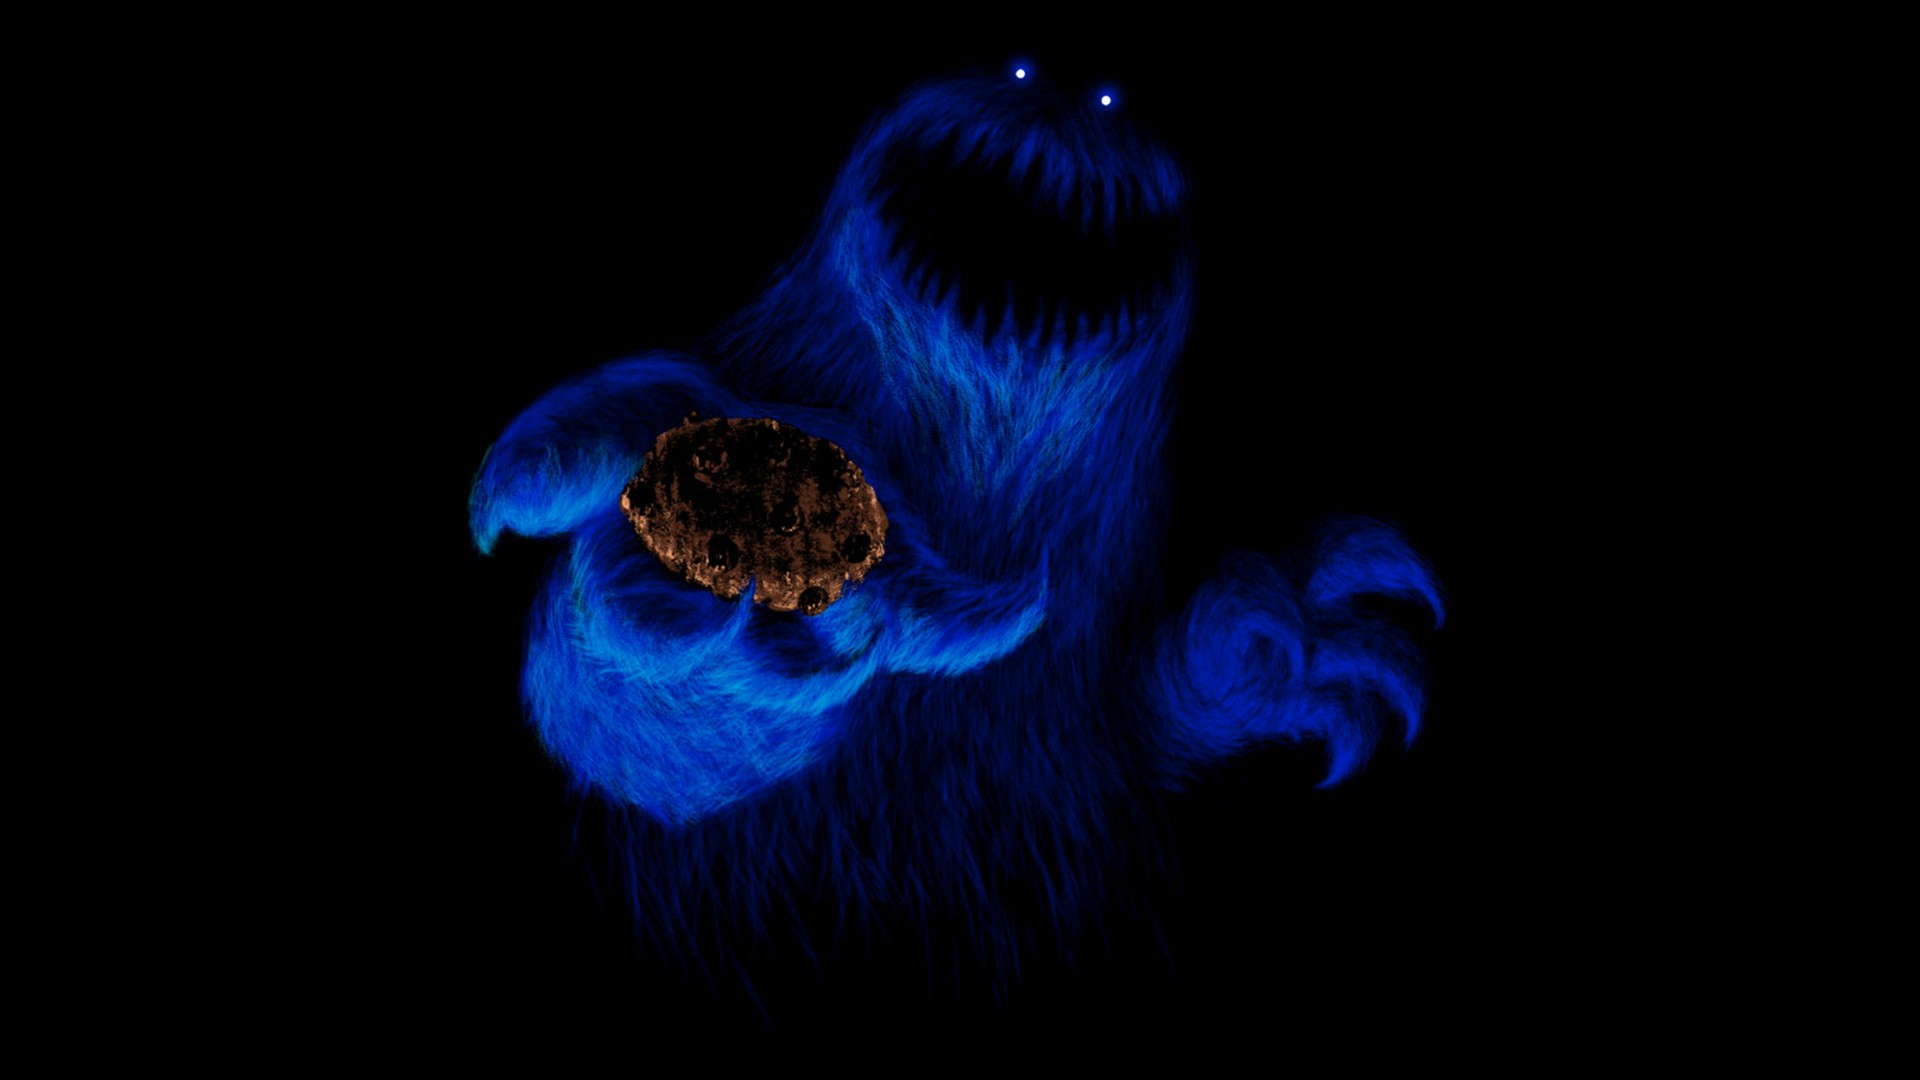 Cookie Monster Wallpaper High Definition Awesome - fullwidehd.com